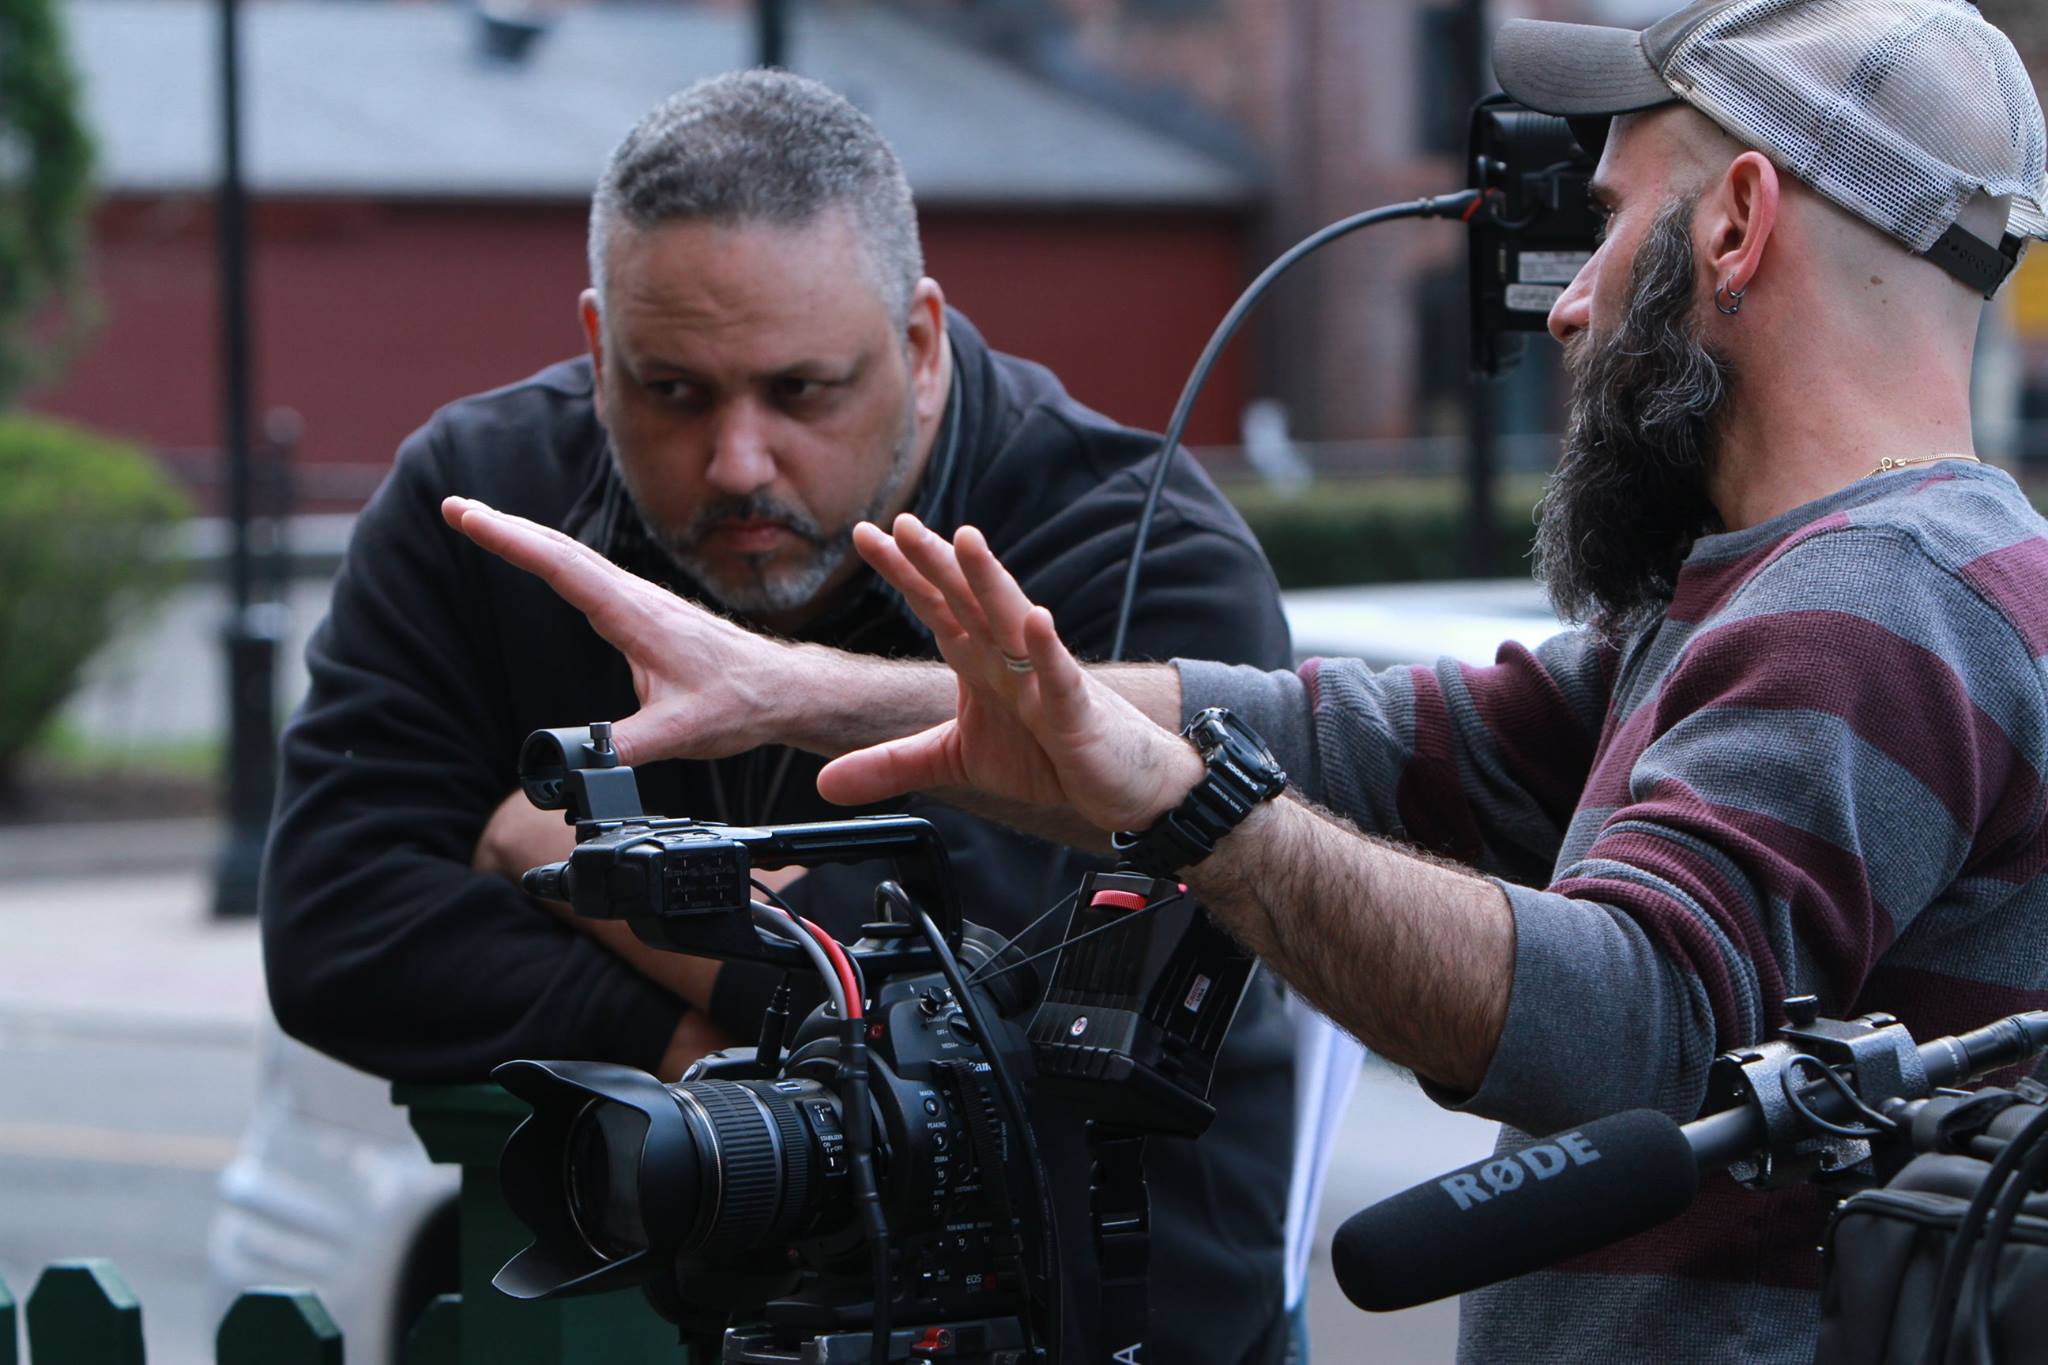 Only Moments director, Angel Rosa (left) discusses a scene with director of of photography, Renato Ghio.